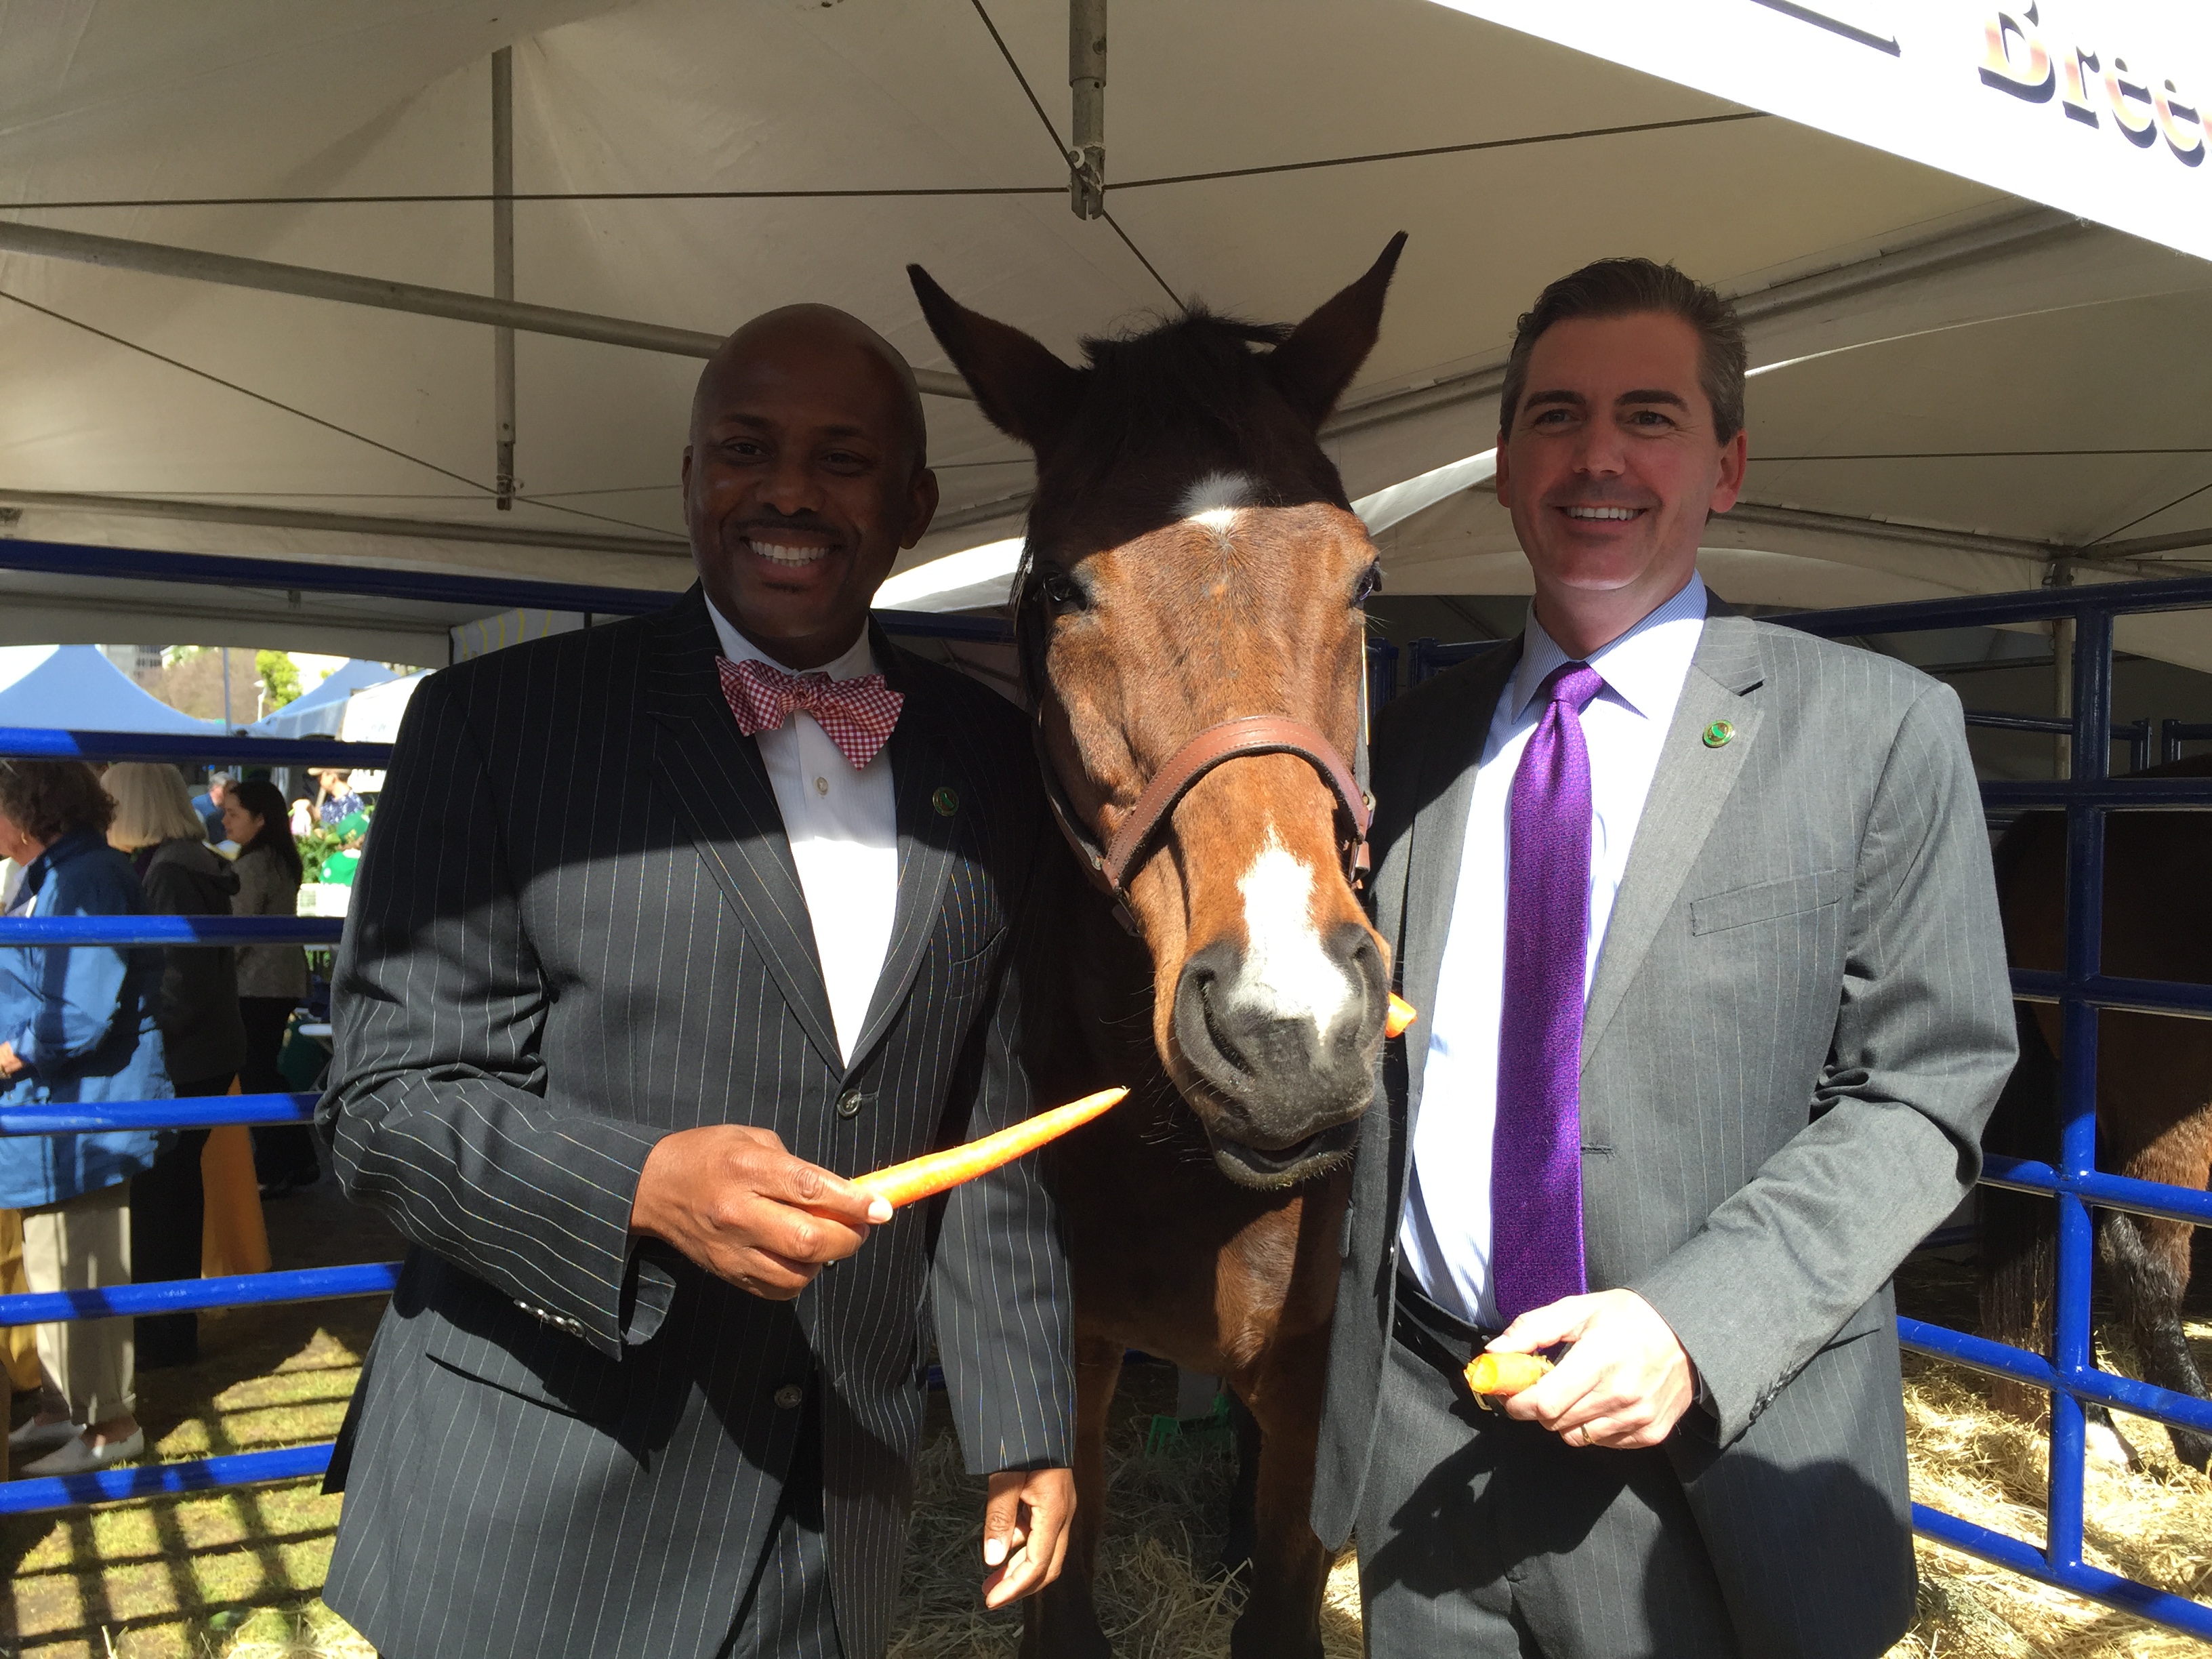 Assemblymen Mike Gipson & Marc Steinorth